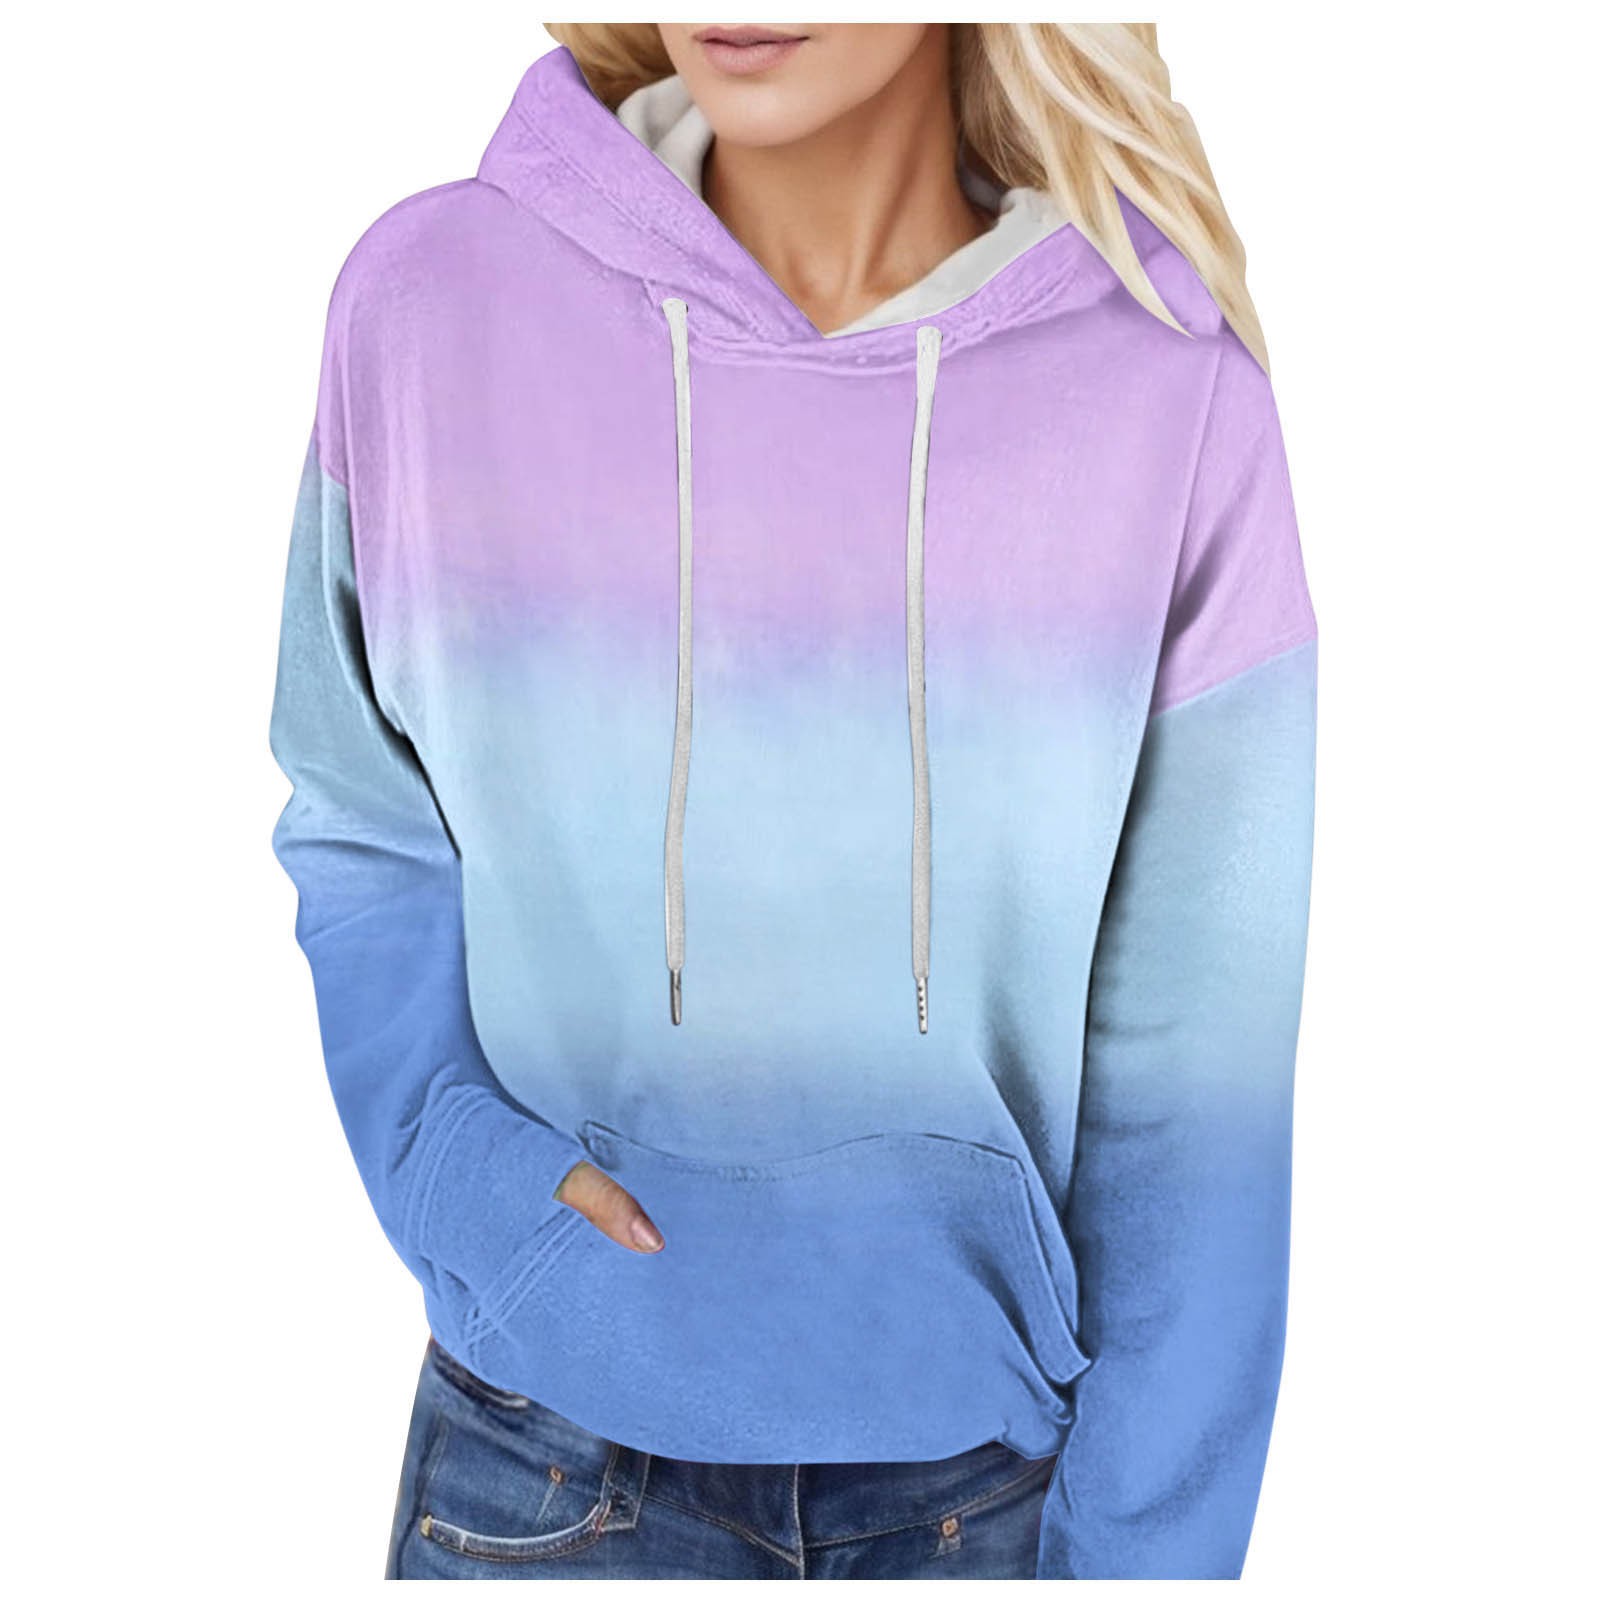 Giftesty Two Piece Outfits Women,Women Solid Color Hooded Sweatshirt ...